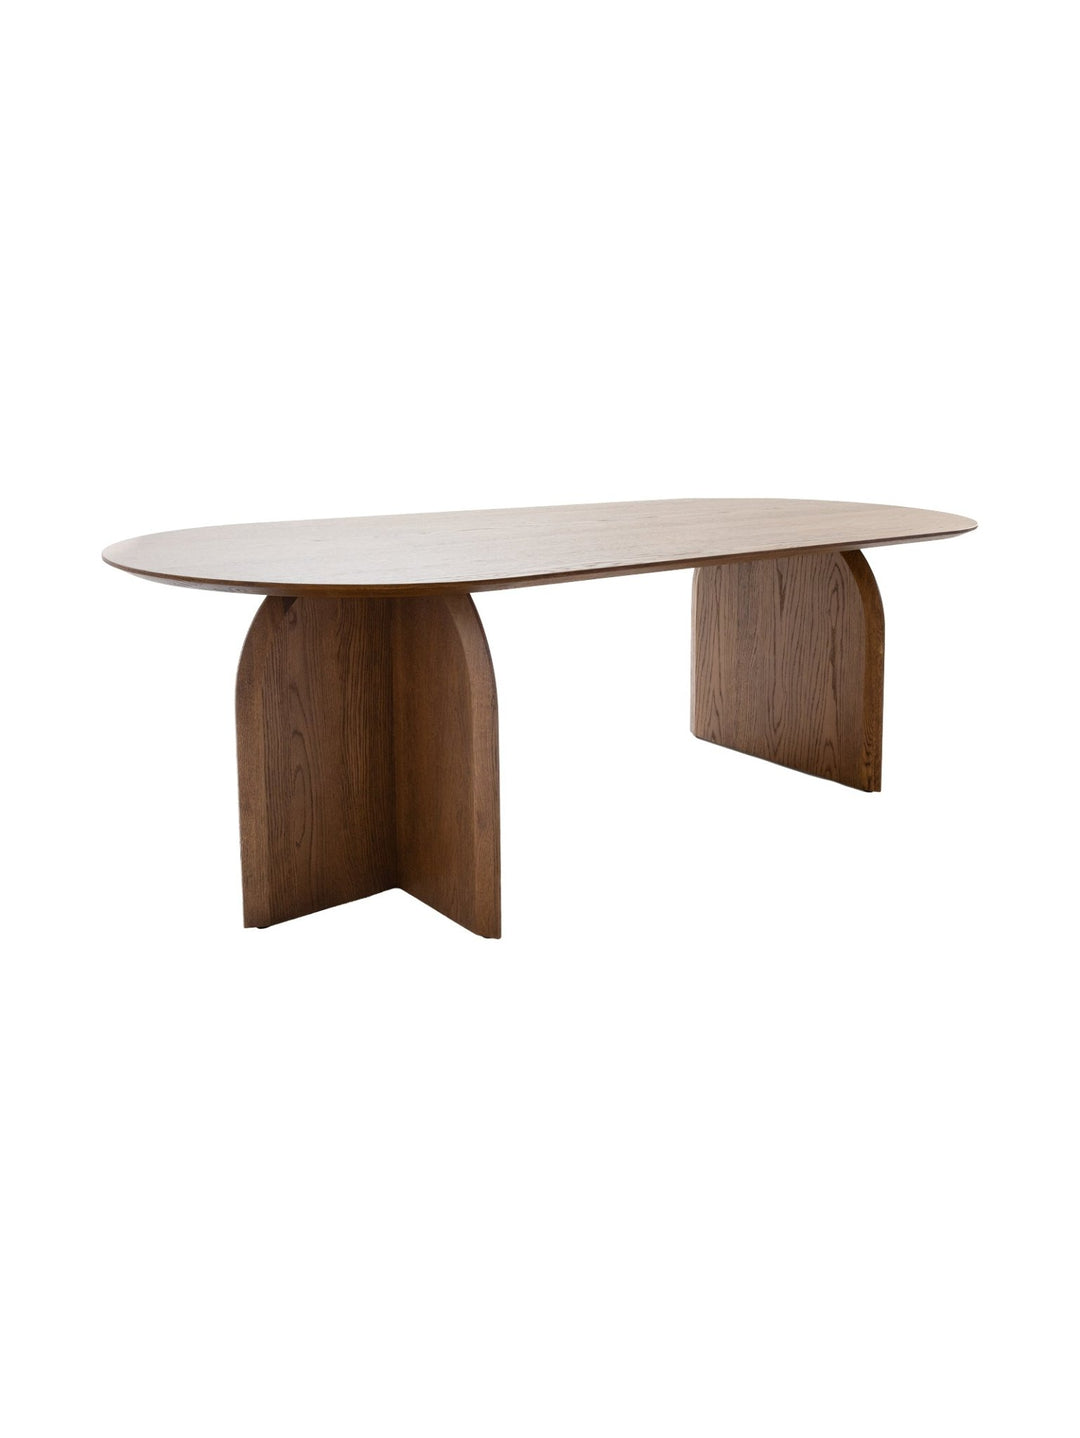 Monument 10 - 12 Seater Oval Dining Table in Shoreline - Table - Hertex Haus - Dining Tables